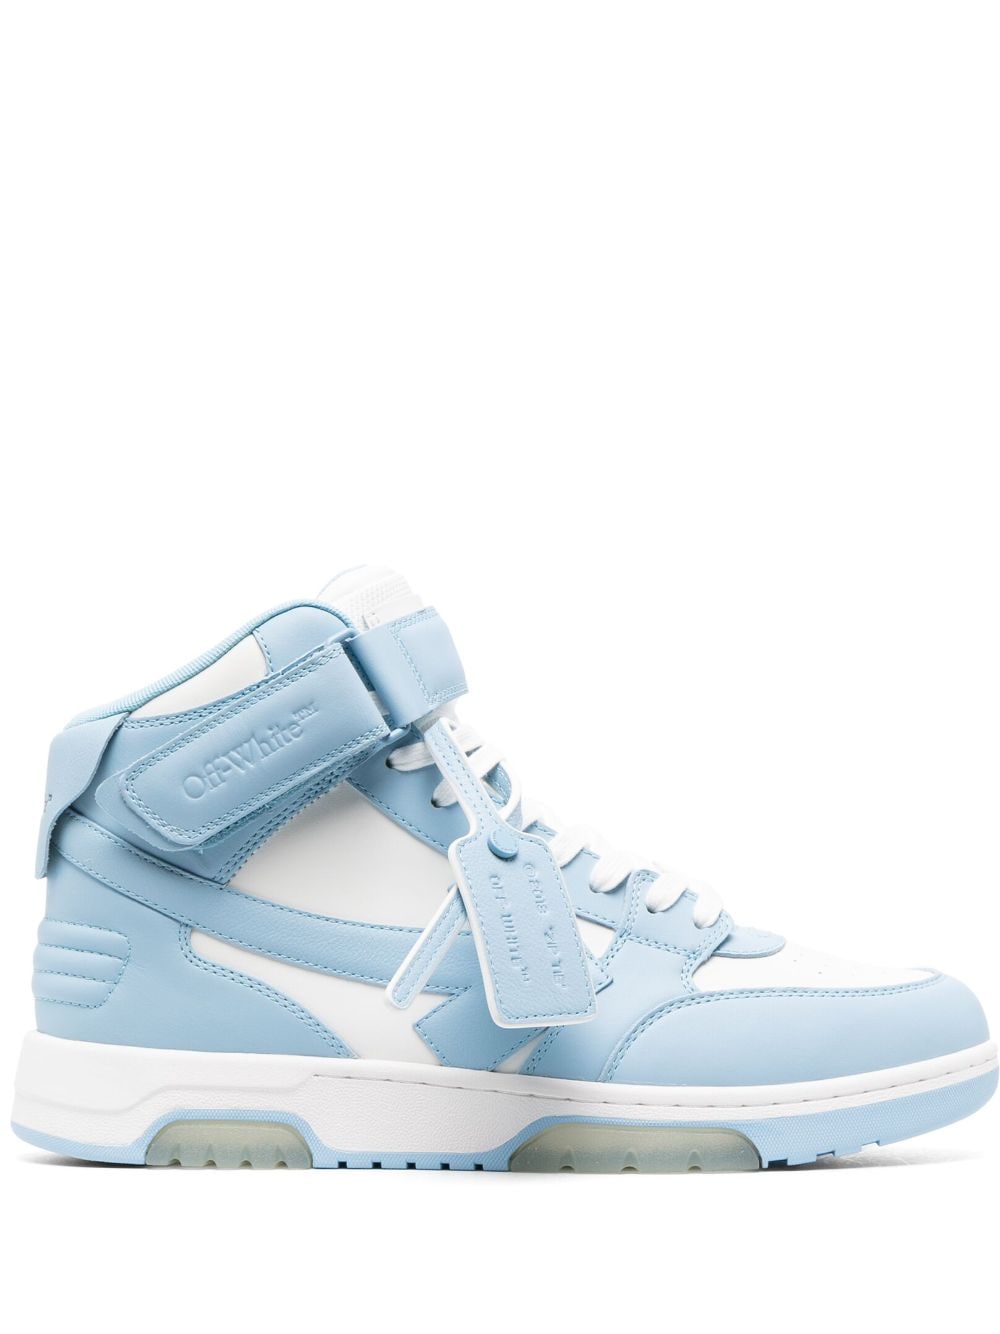 Image 1 of Off-White "Out Of Office ""OOO"" sneakers"